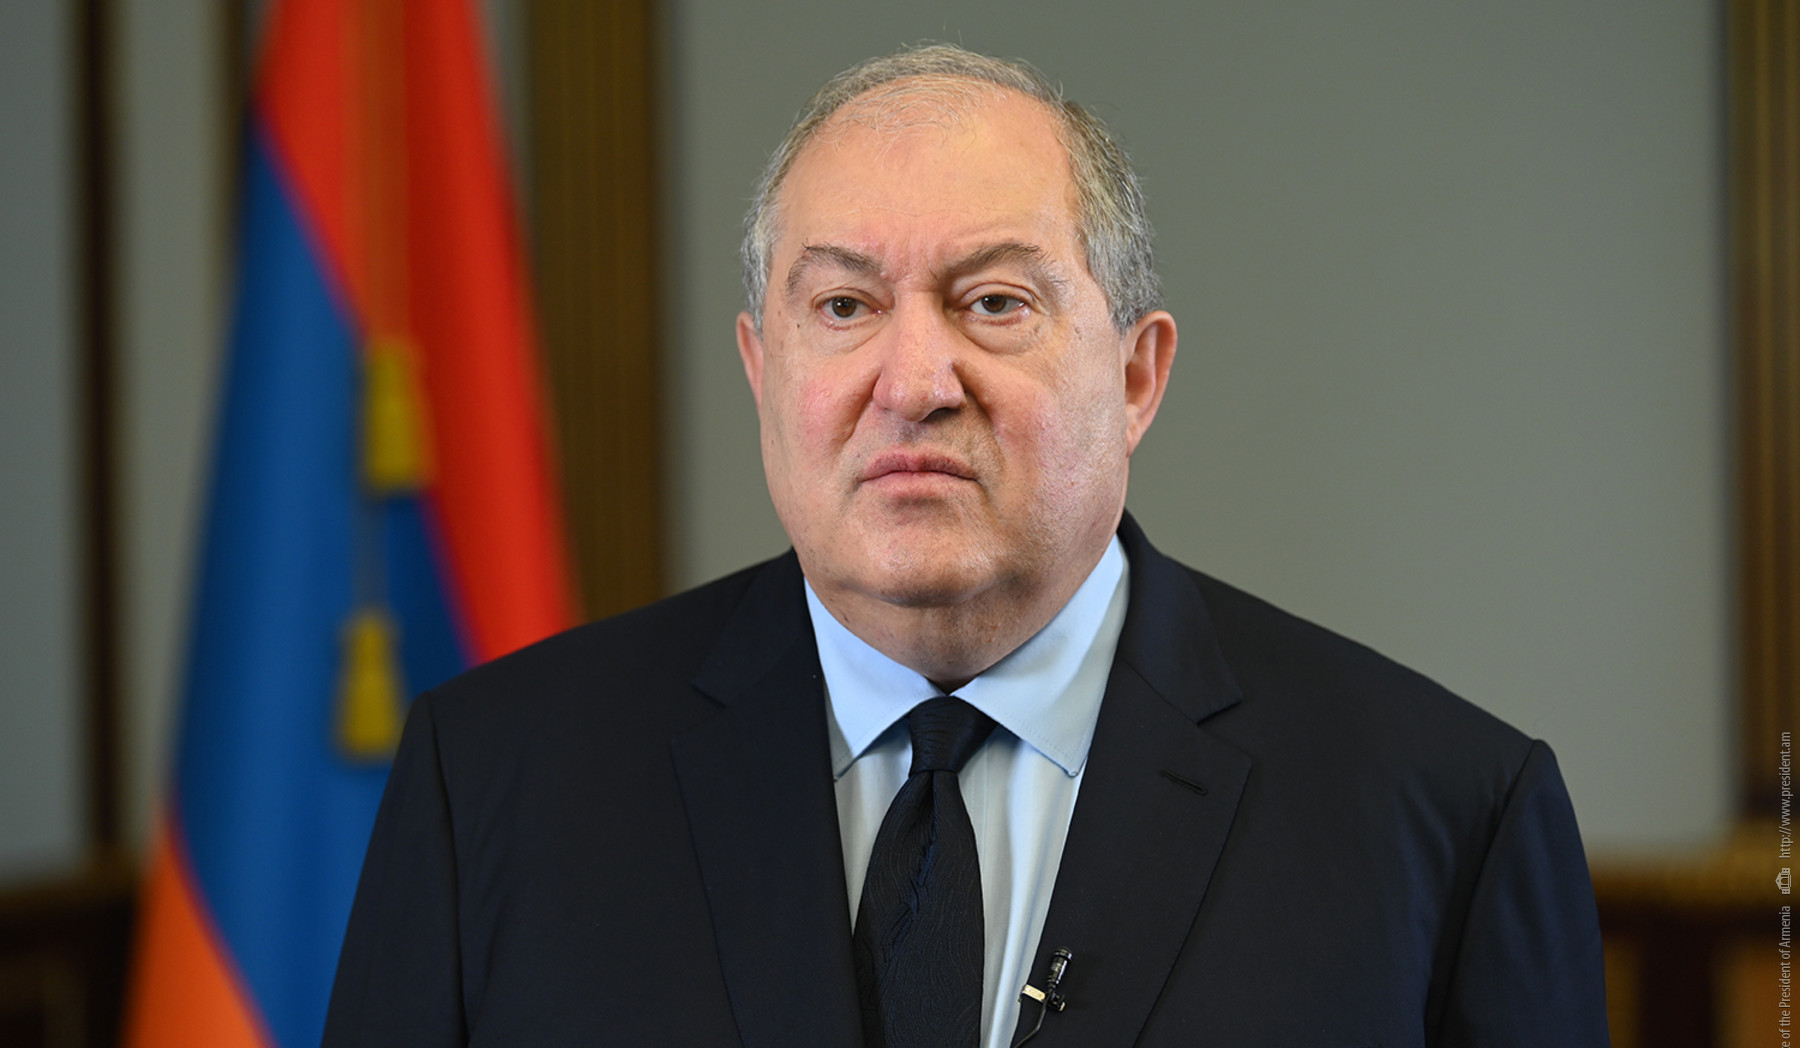 Armen Sarkissian expressed condolences to families and relatives of the killed servicemen